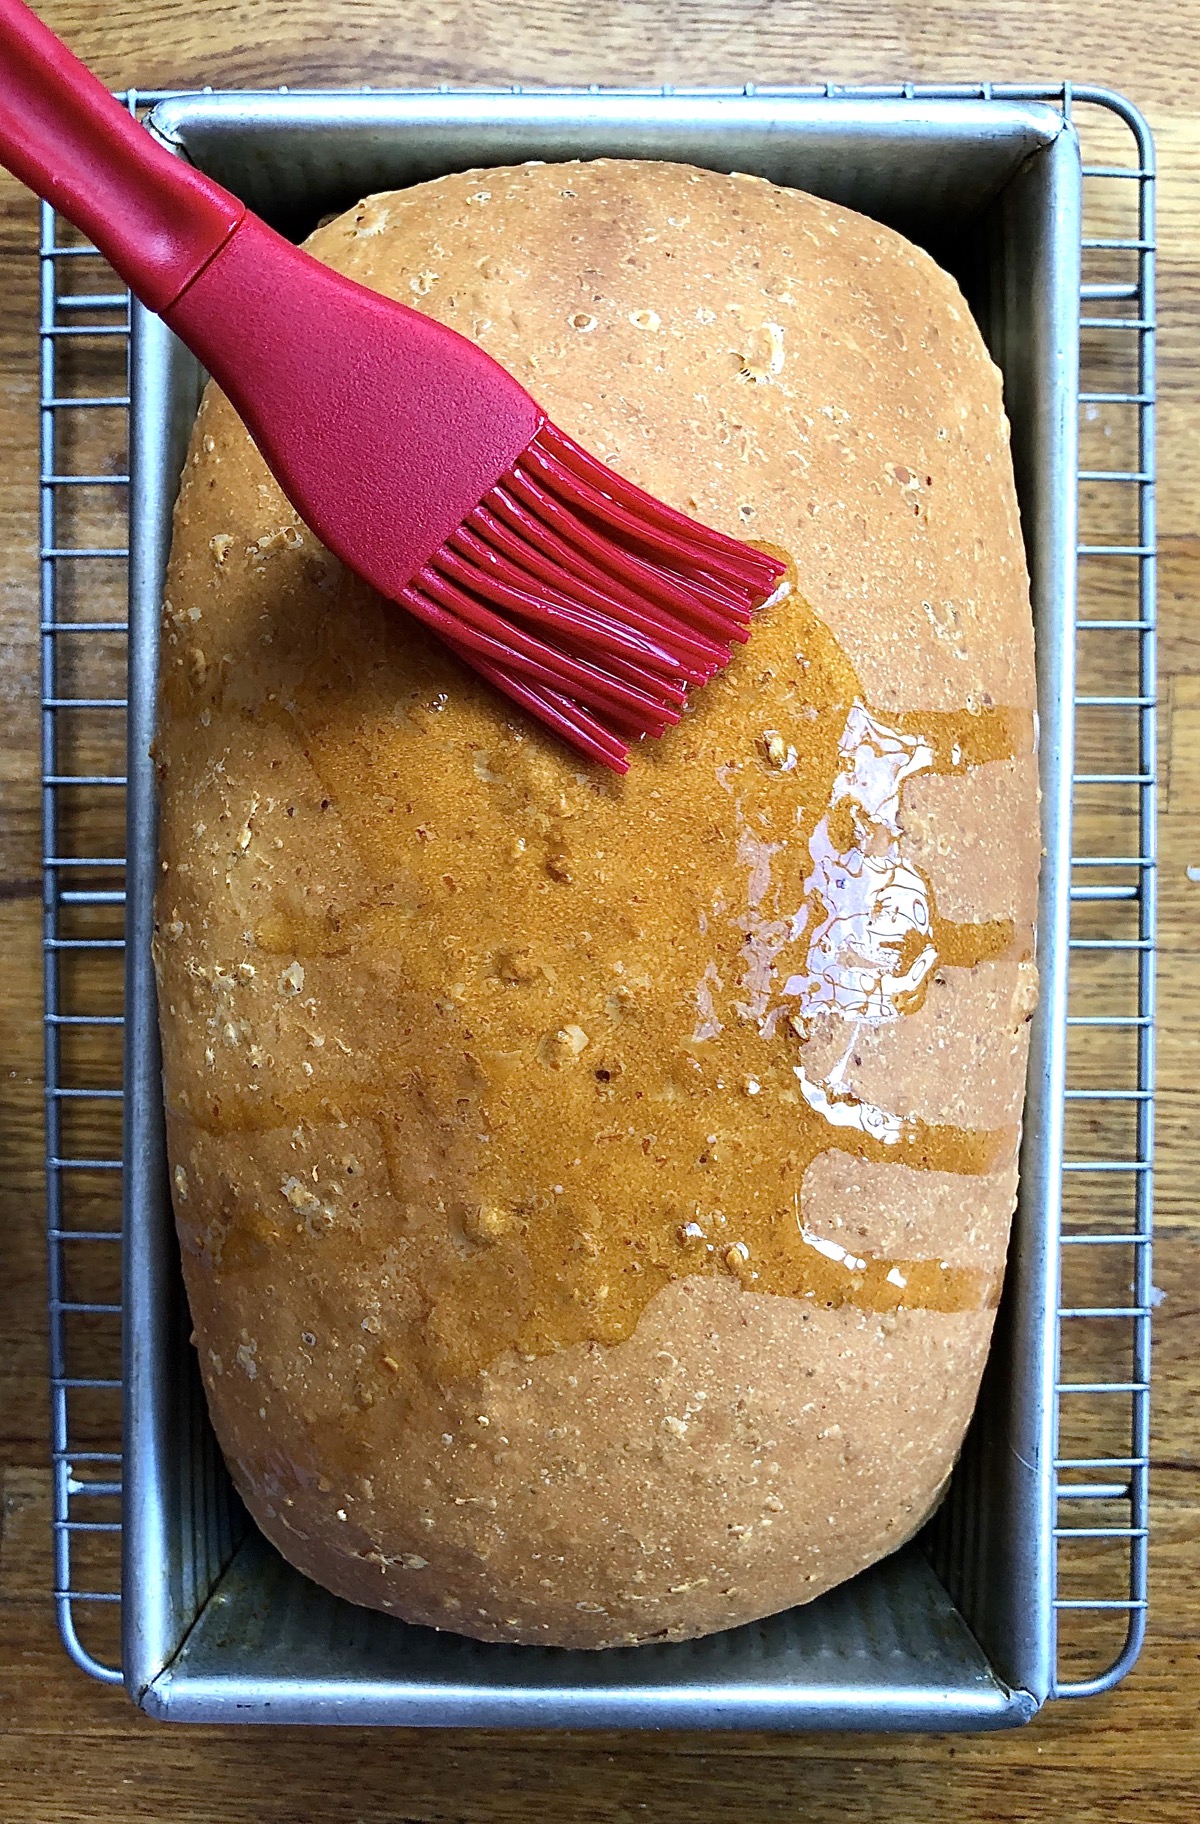 Oatmeal bread, hot out of the oven, being brushed with melted butter